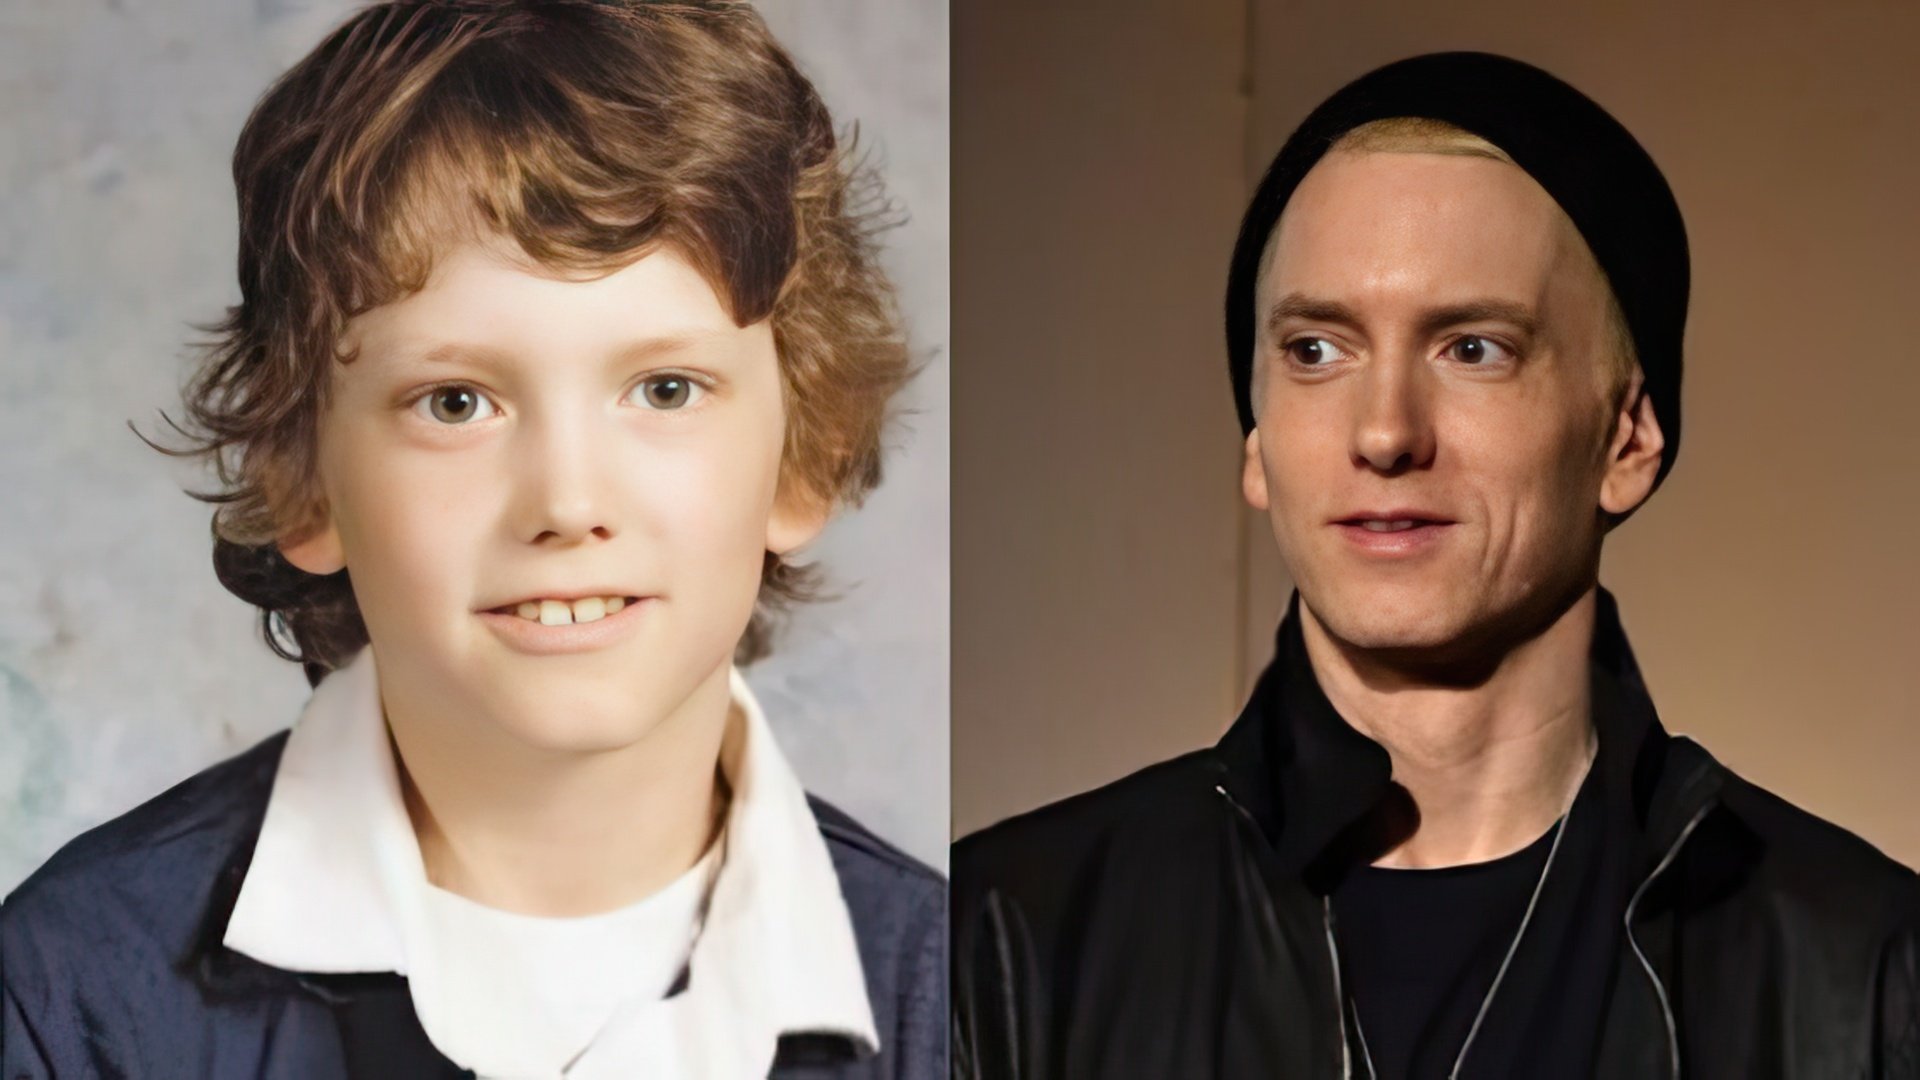 Eminem in his childhood and now